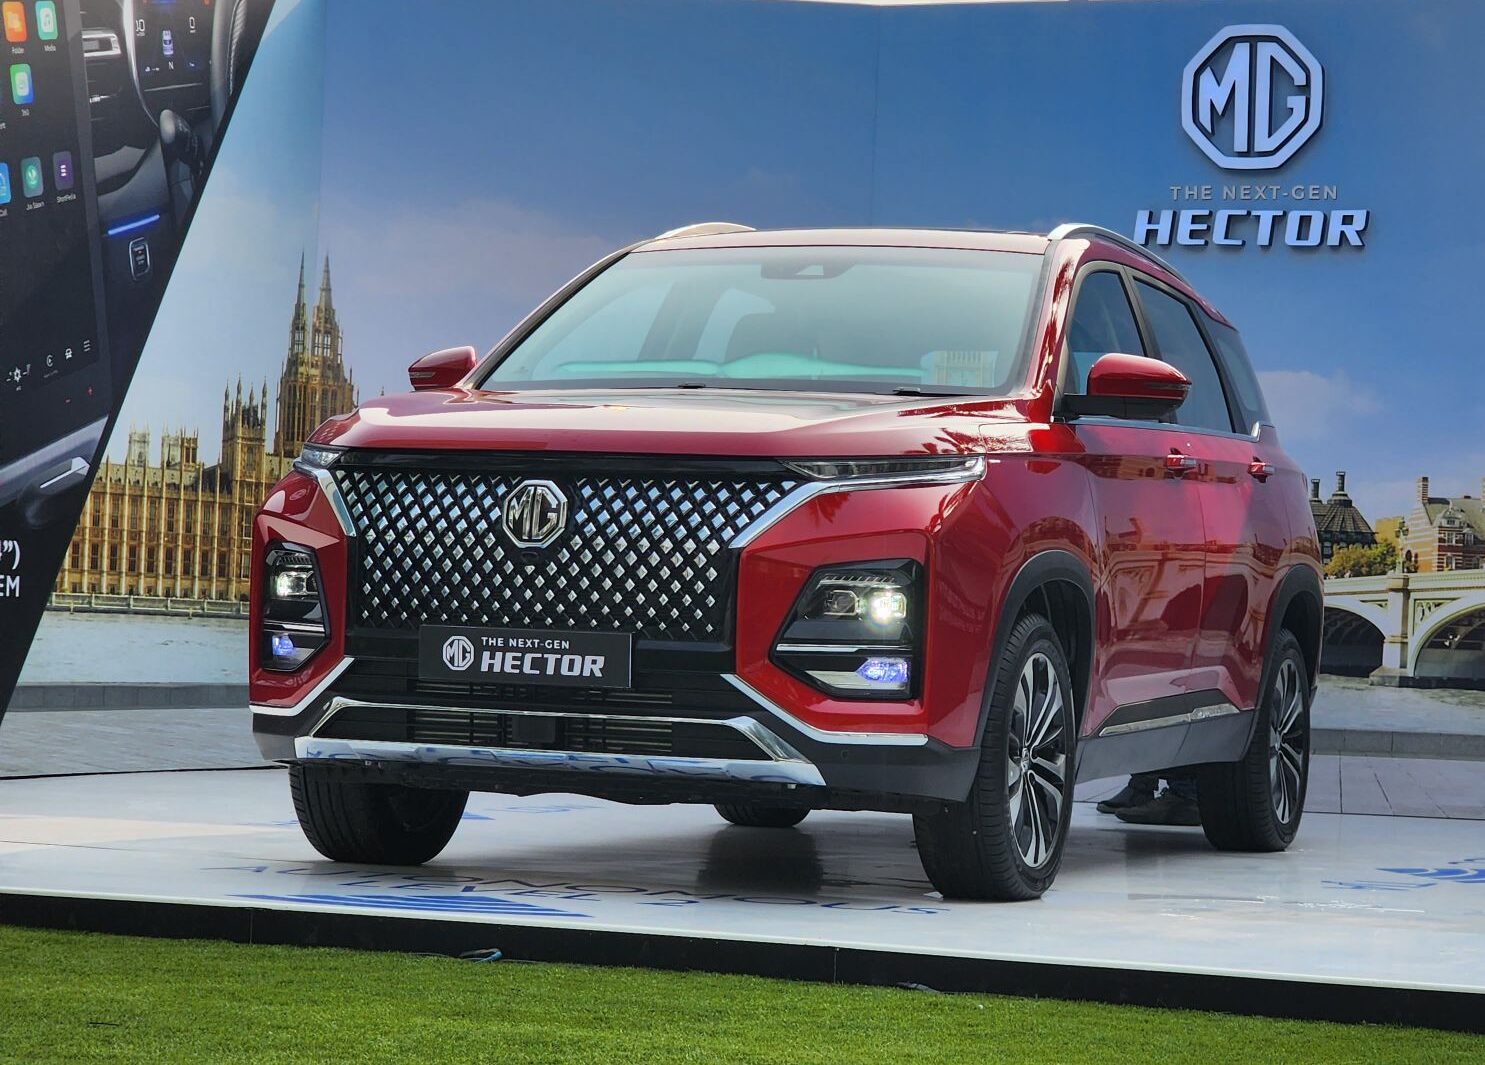 MG Hector Price Revised, Now Starts At Rs. 14 Lakh